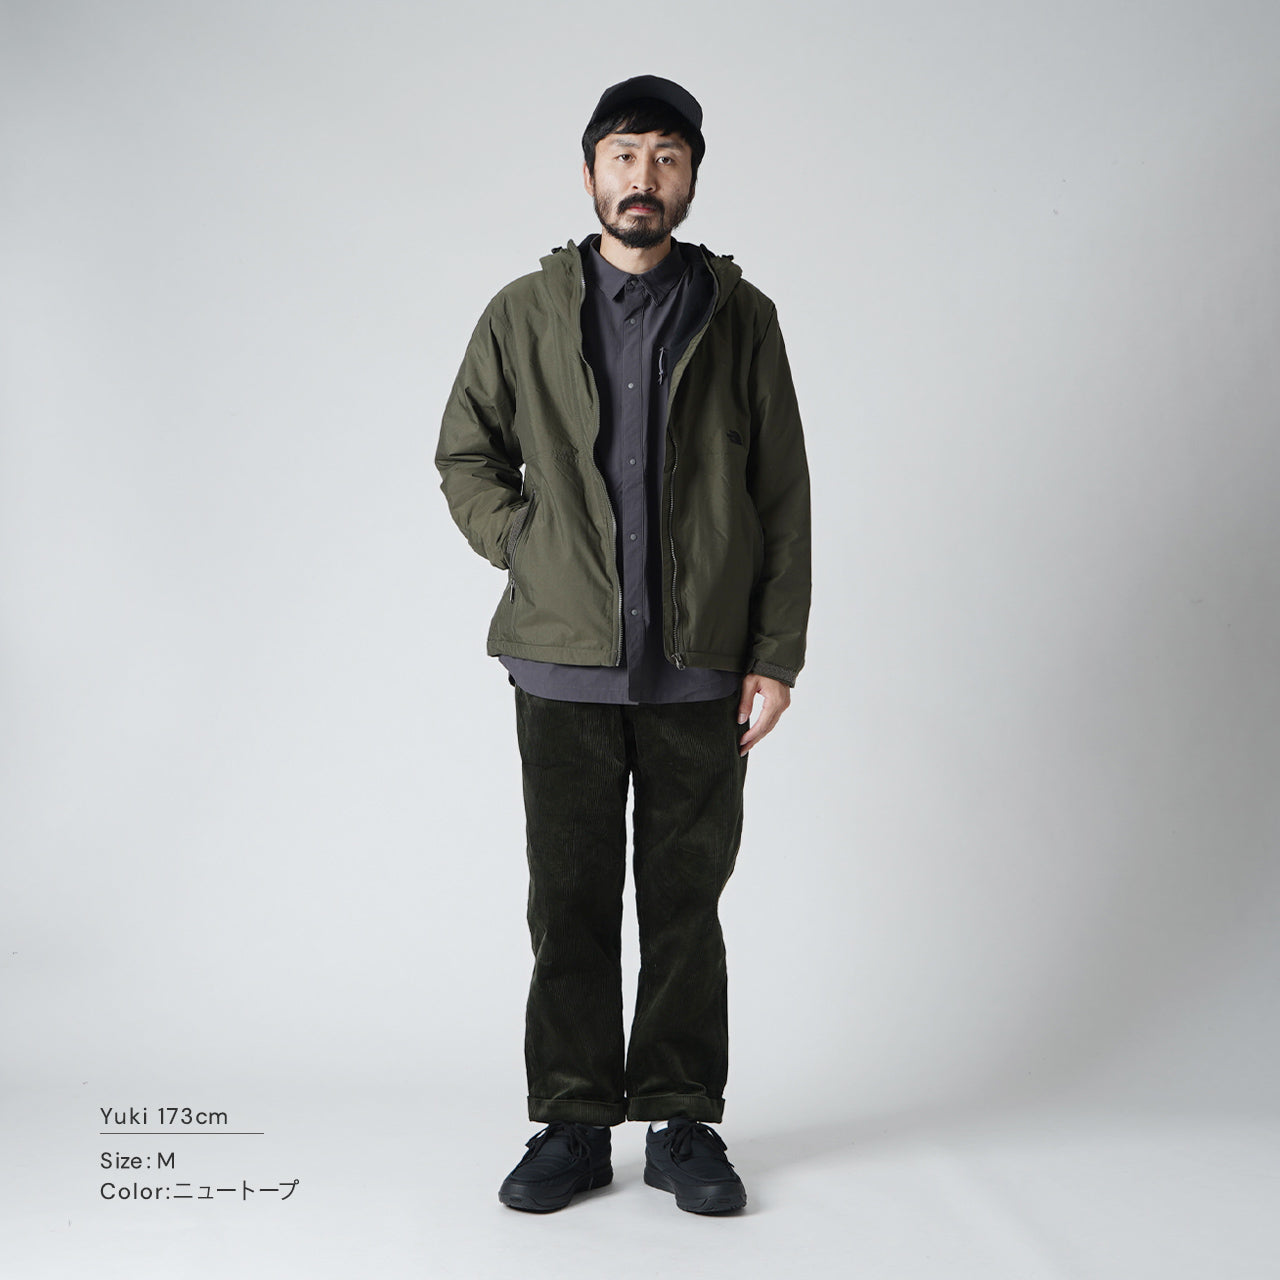 THE NORTH FACE ノースフェイス コンパクト ノマド ジャケット Compact Nomad Jacket NP72330【送料無料】